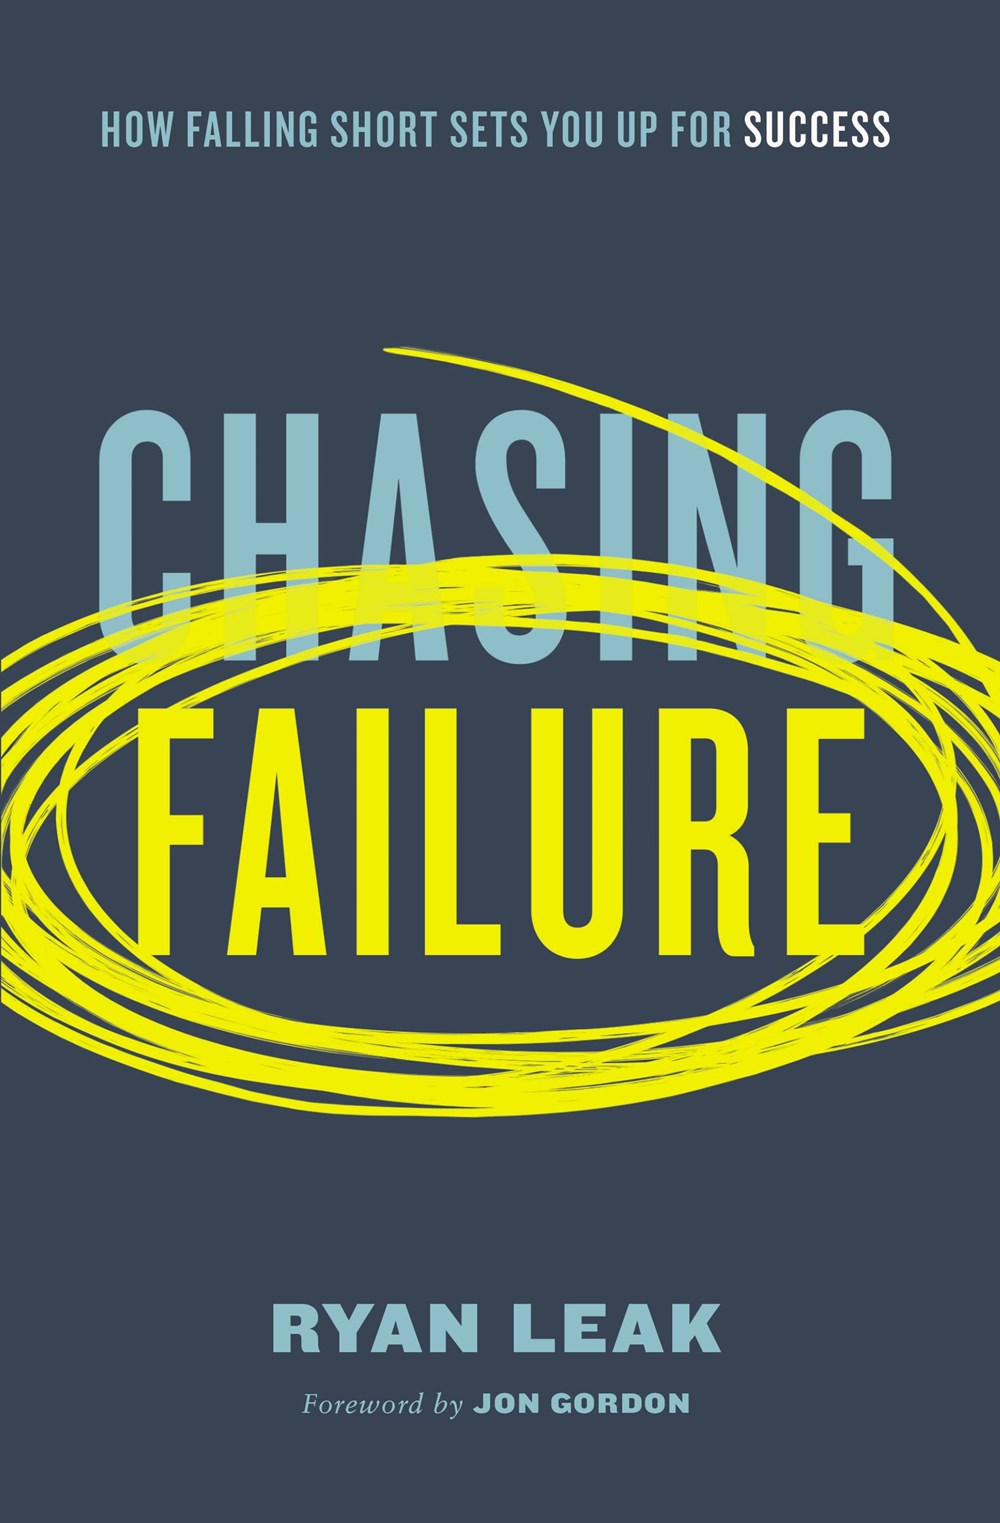 Chasing Failure How Falling Short Sets You Up for Success